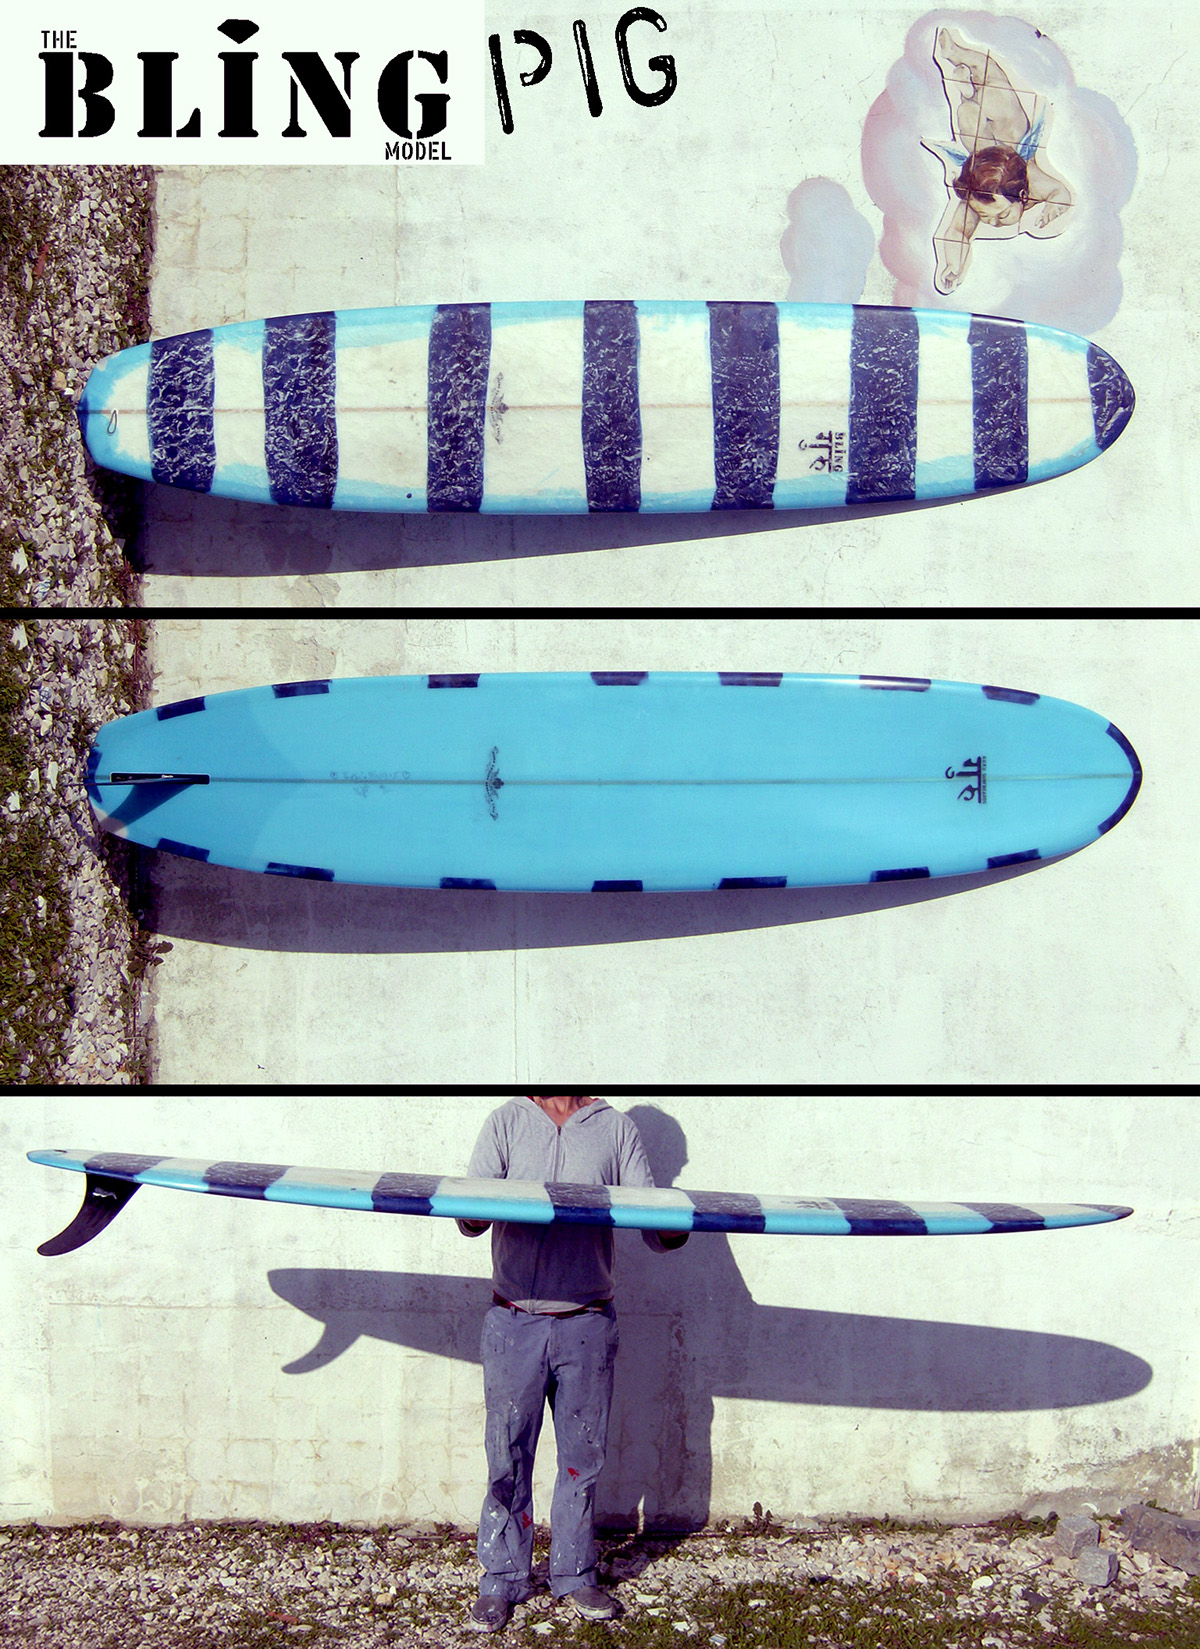 Surf shape hand-made surfboards Longboards Mini-Simmons Bonzer egg Noseriders